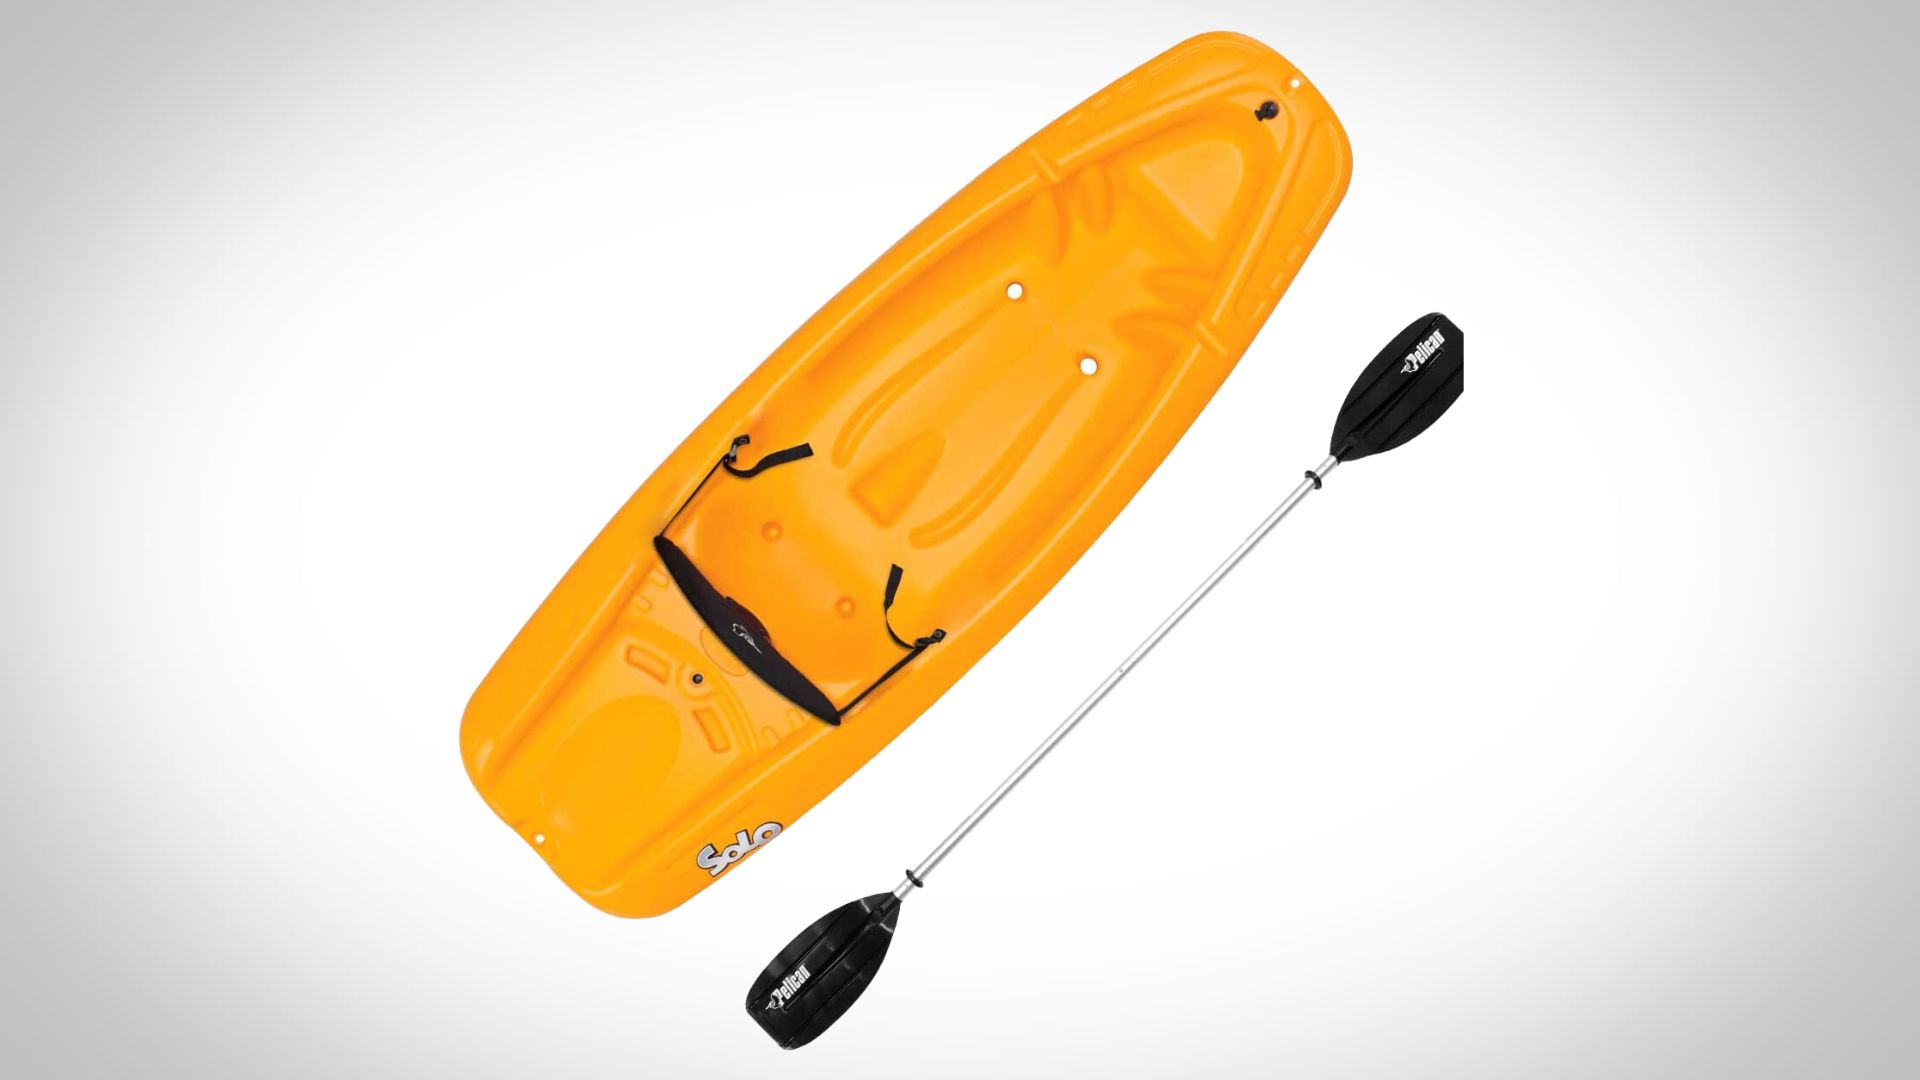 Pelican Solo 6 Feet Sit-on-top Youth Kayak Review